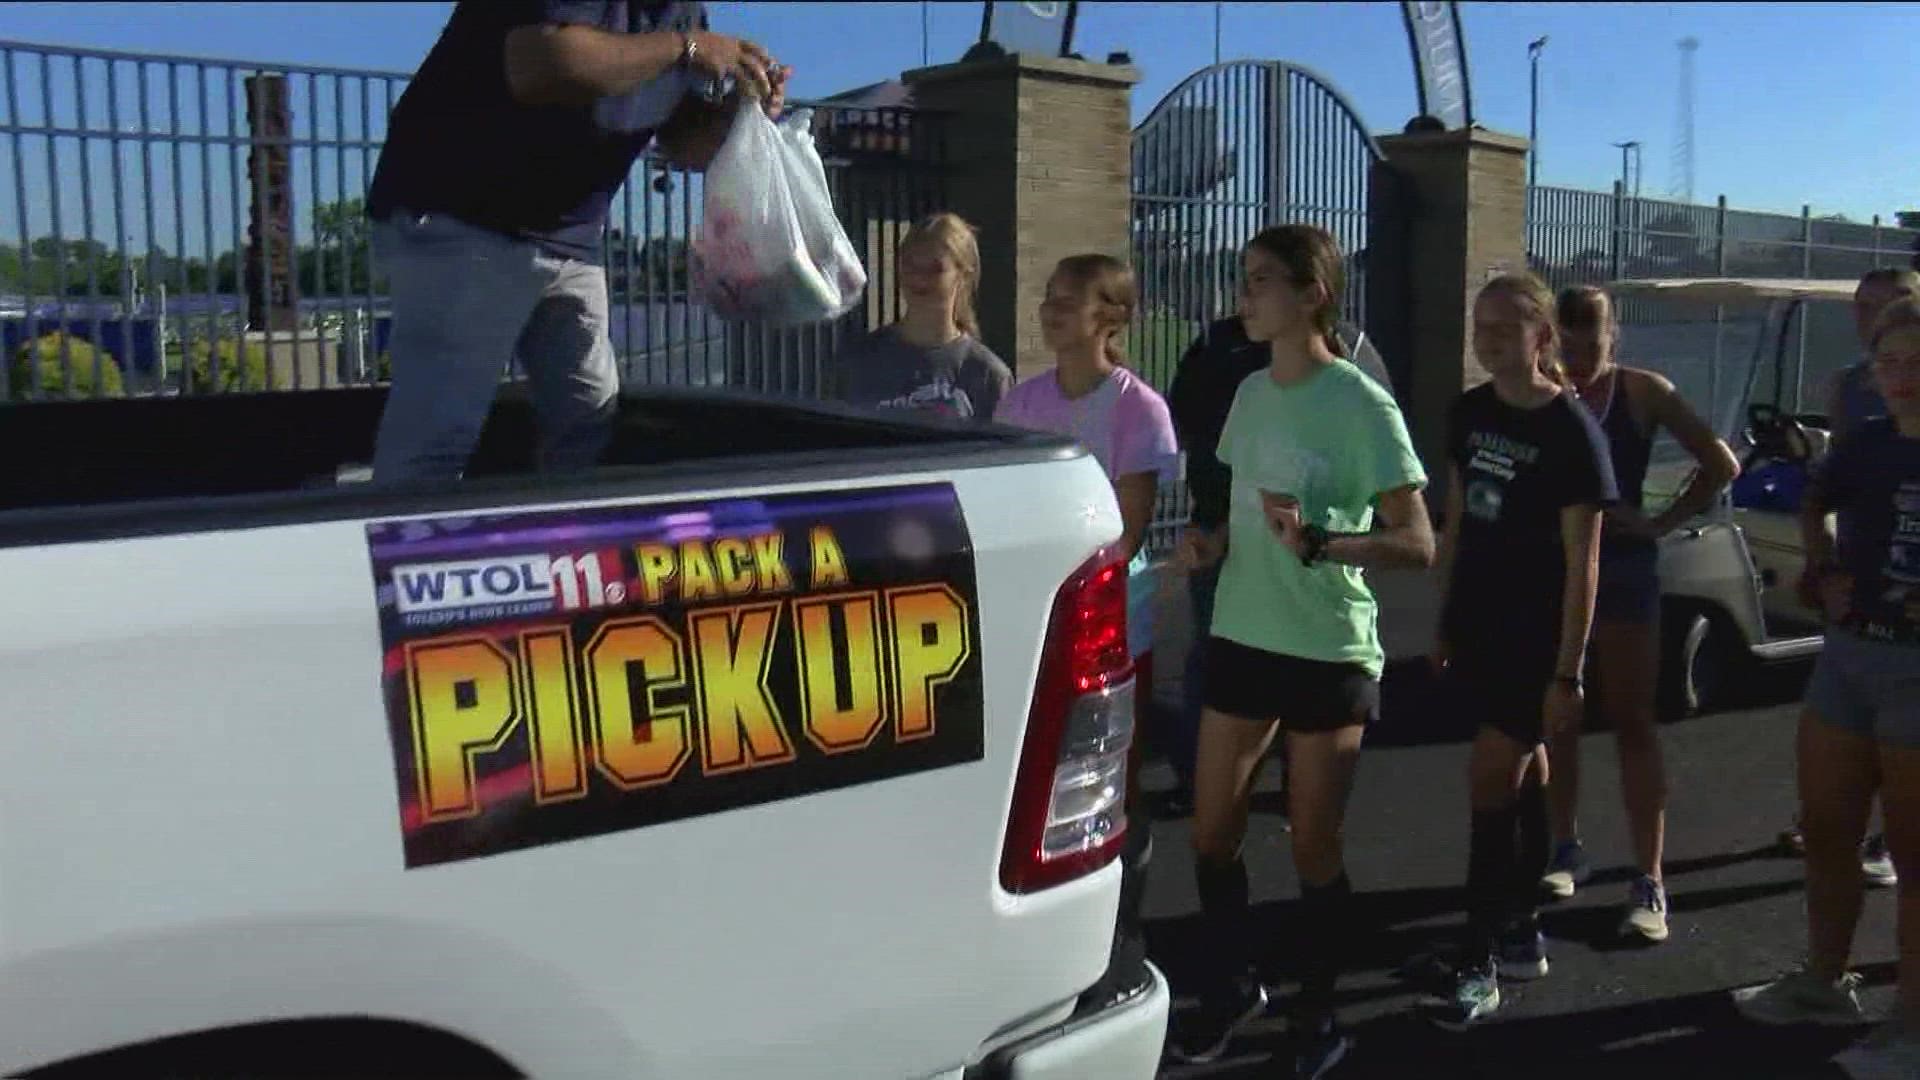 For this week's Pack a Pickup Challenge, it was the Napoleon Wildcats' turn to show up and support the Seagate Food Bank.